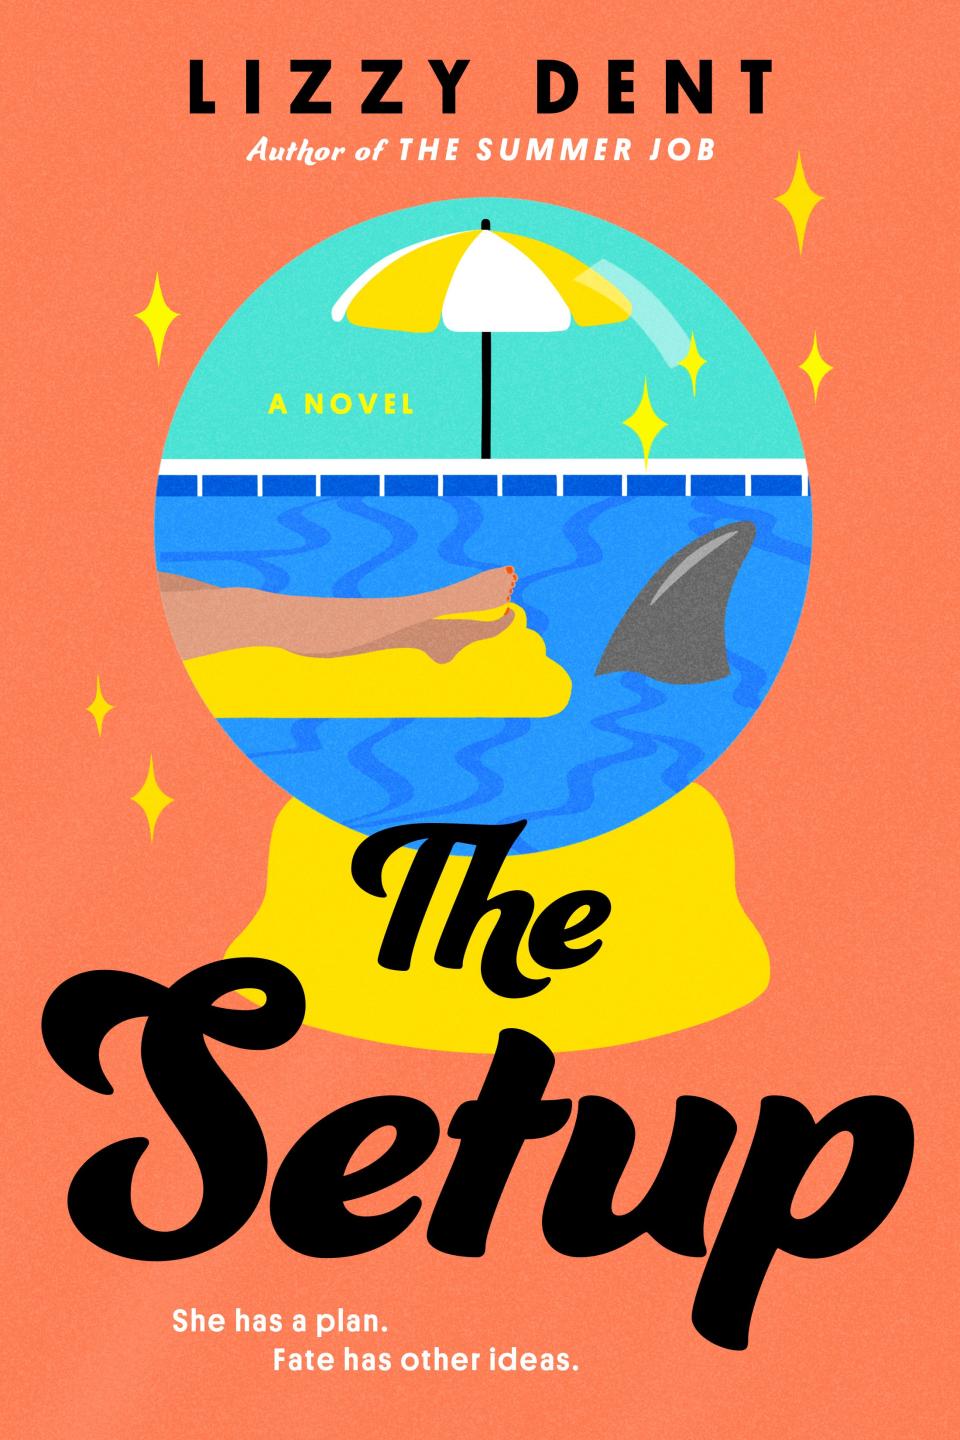 "The Setup," by Lizzy Dent